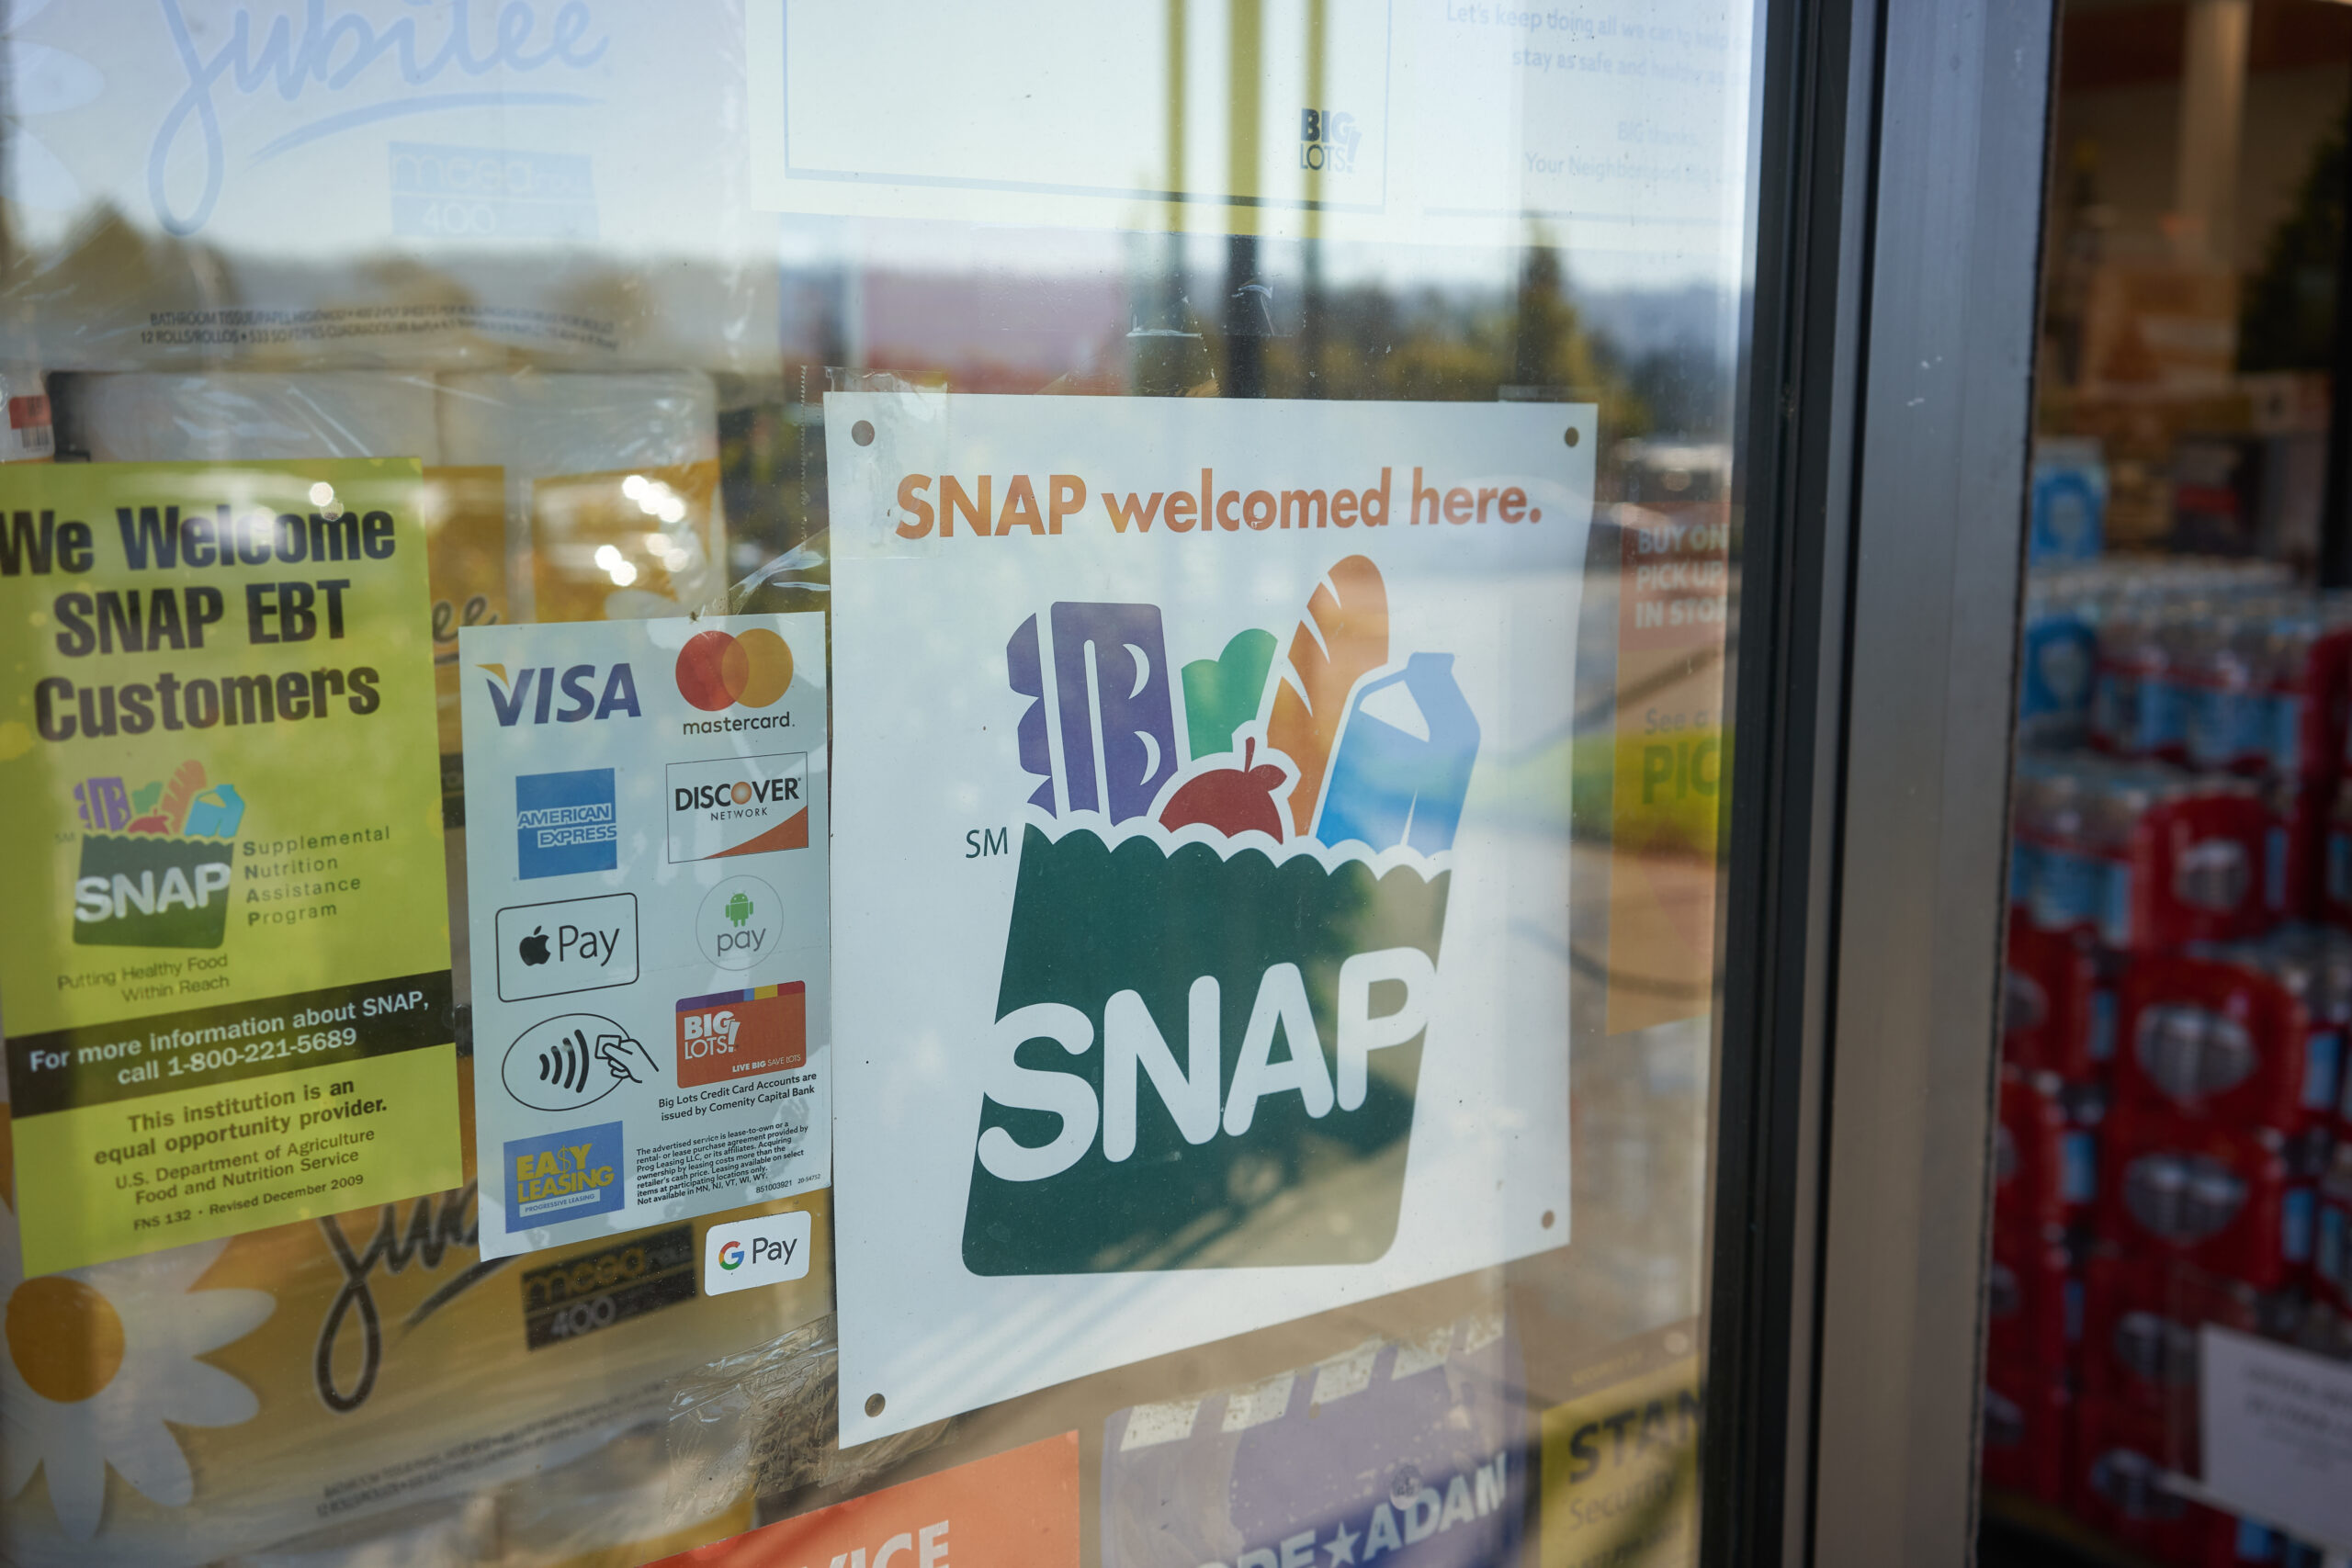 A photograph of a grocery store window with a sign indicating that SNAP benefits are welcomed.